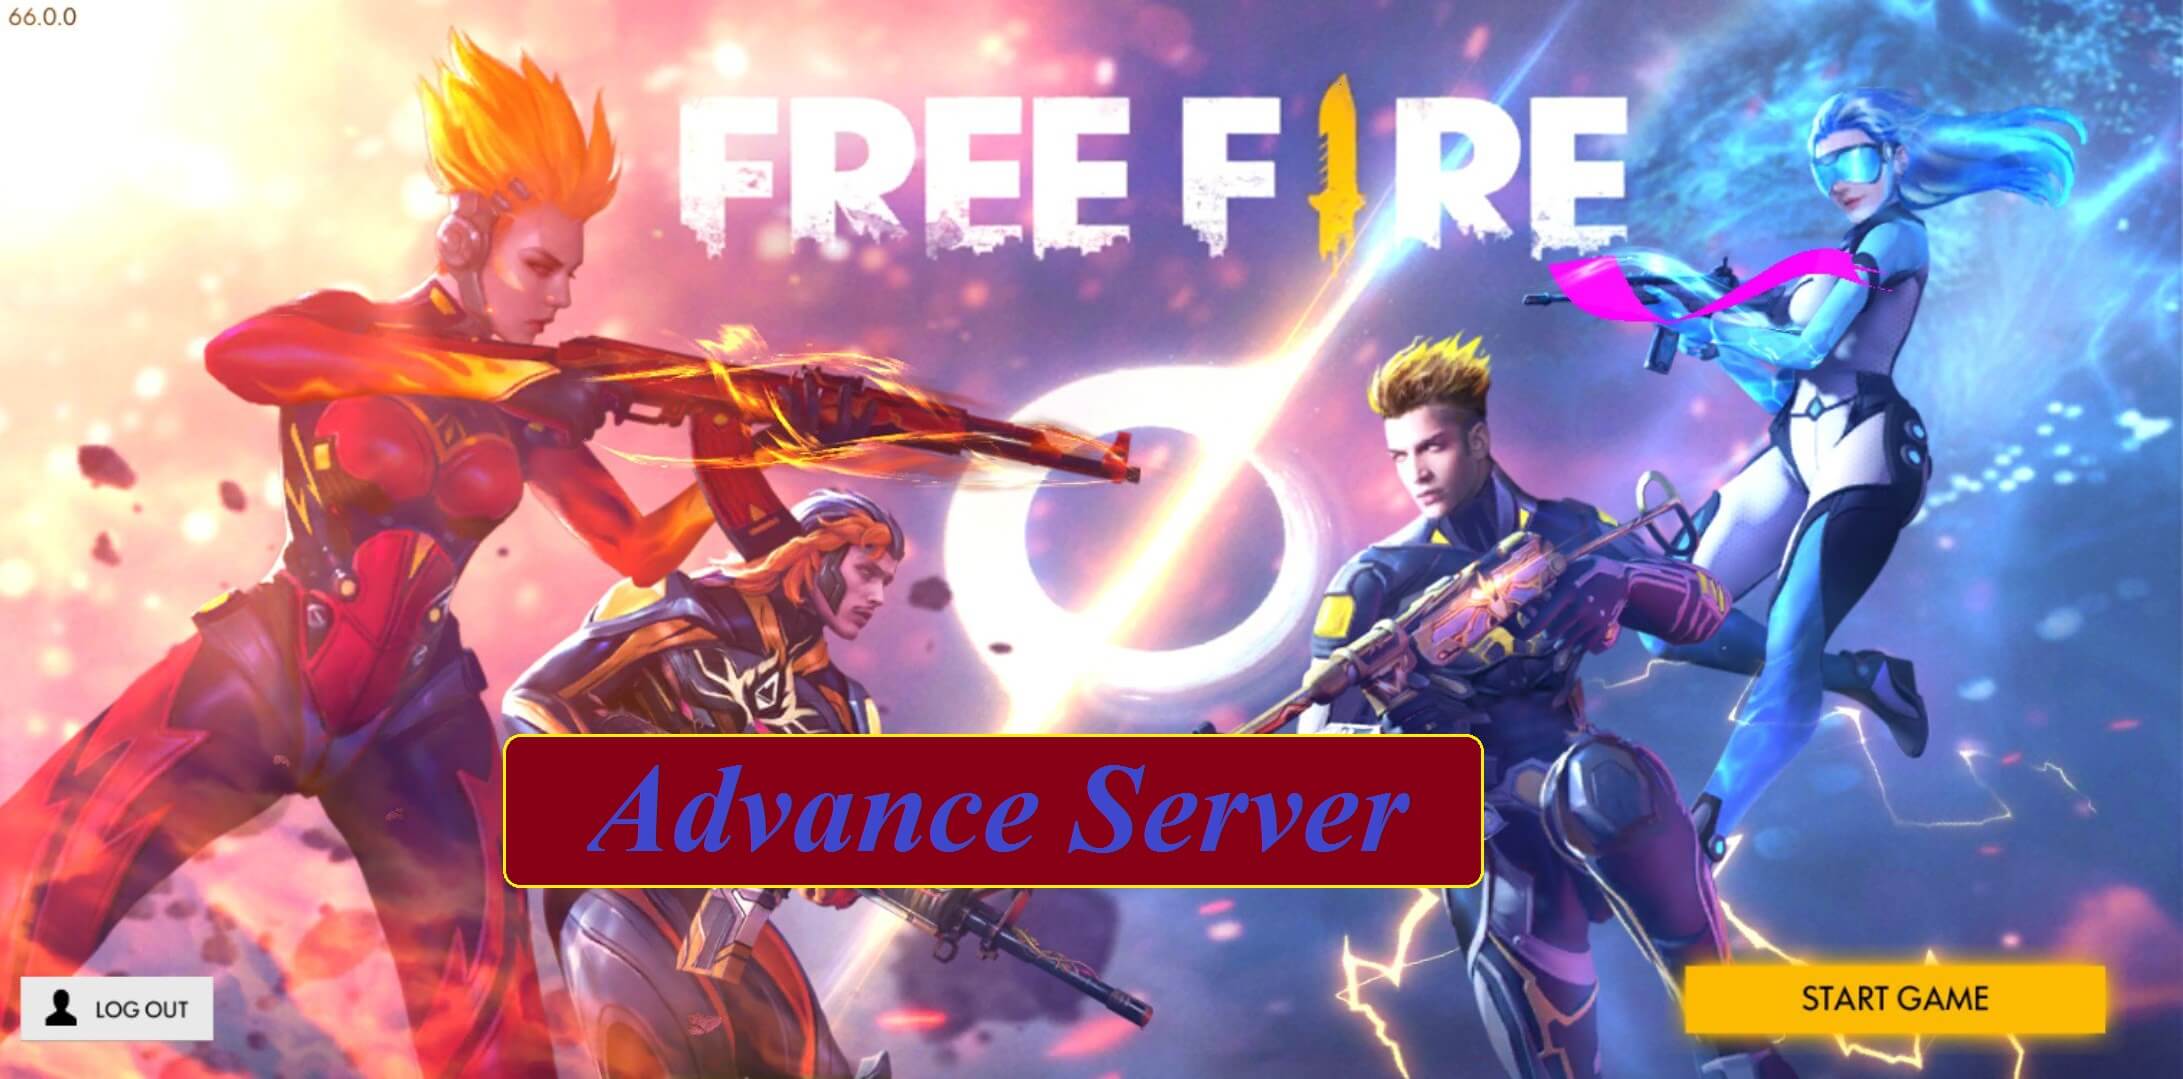 Download Garena Free Fire Advance Server On Android Mobile Mode Gaming